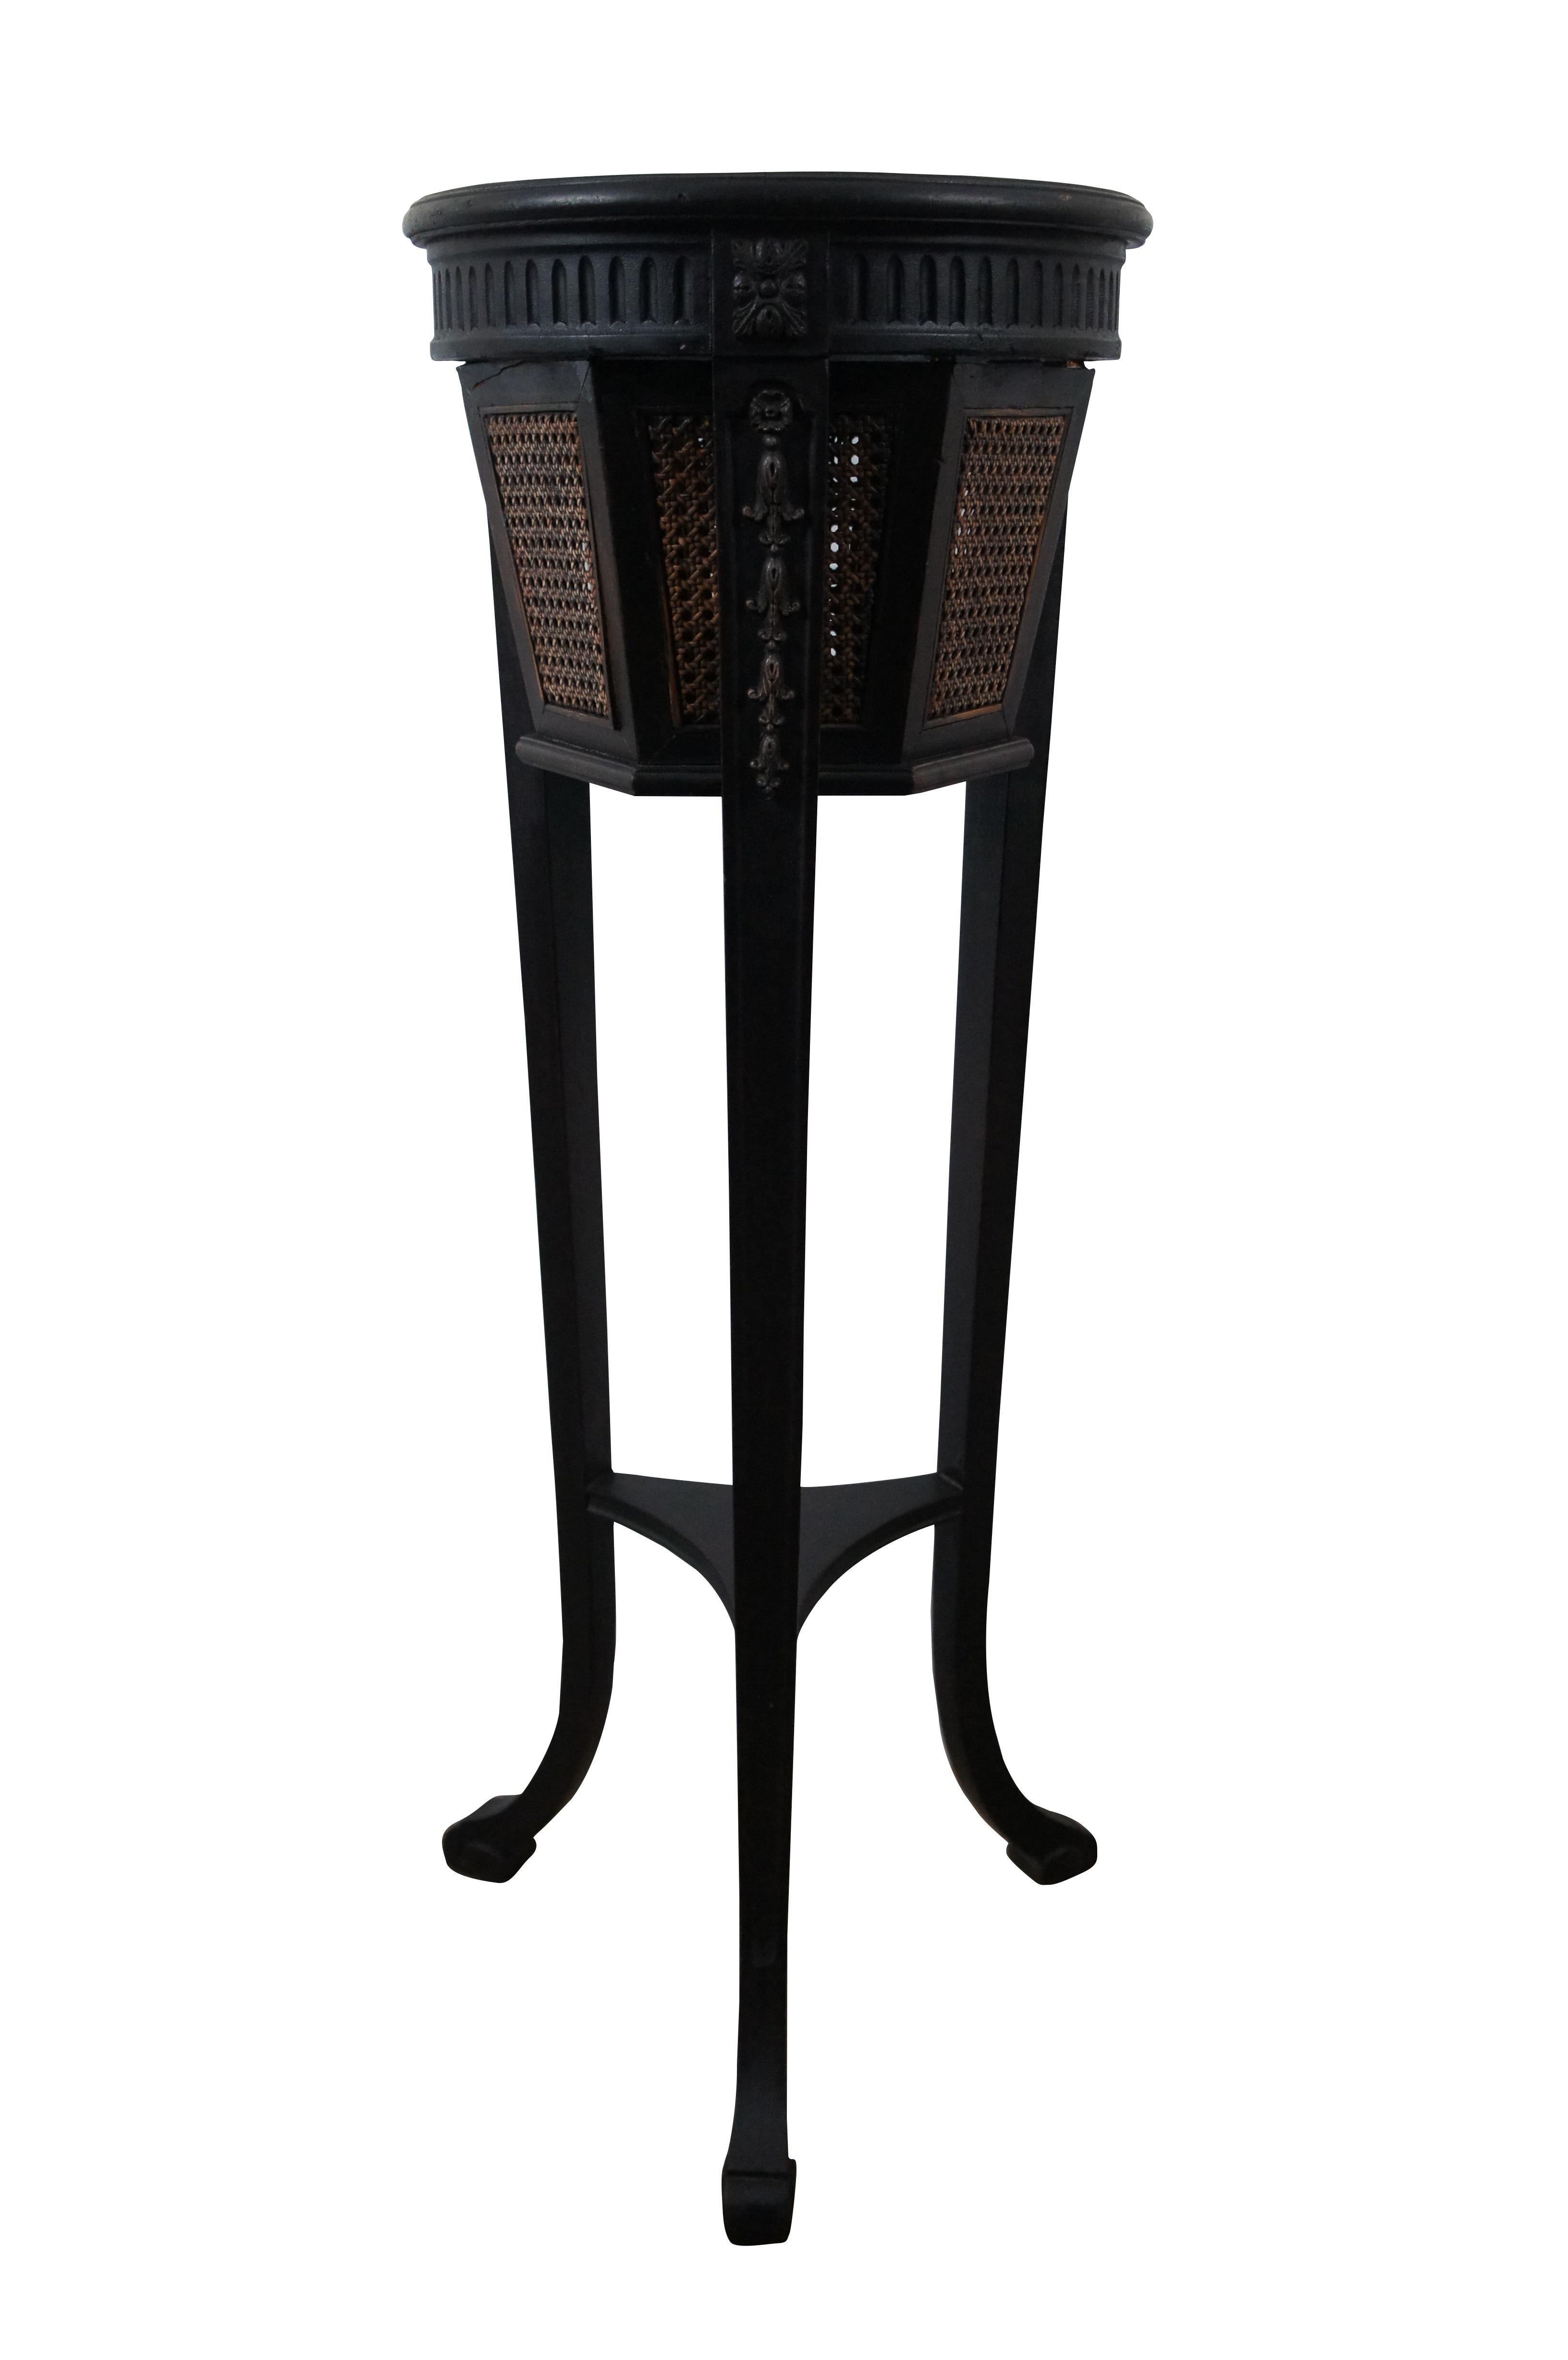 Antique Gustavian style plant stand featuring black painted mahogany frame with hexagon shaped caned planter, tapered tripod legs, and fluted and carved floral accents.


DIMENSIONS

13” x 36” (Diameter x Height)